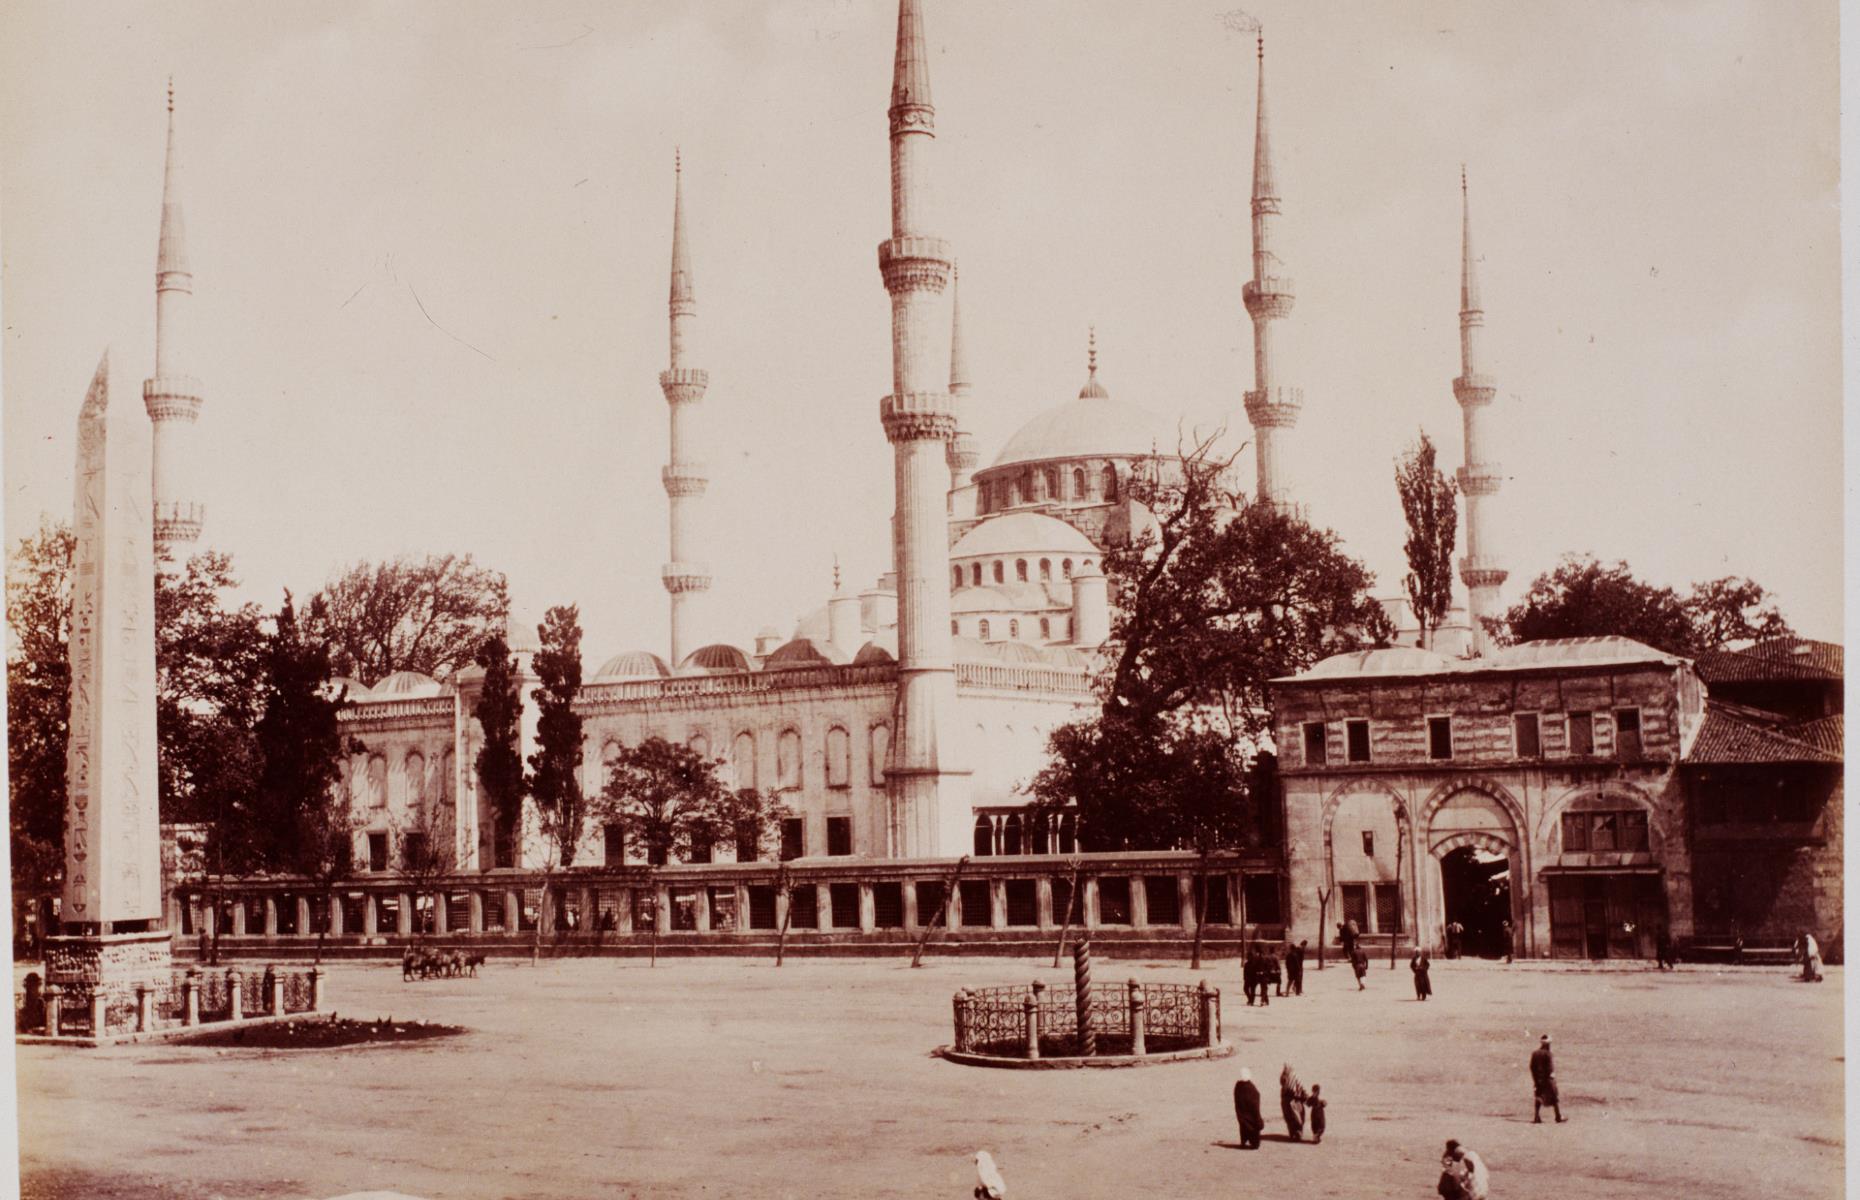 <p>The Blue Mosque in Istanbul was built between 1609 and 1616, as a way for Sultan Ahmed I to reassert the Ottoman Empire’s power following the Peace of Zsitvatorok (1606) and losses in wars with Persia. With six minarets, five main domes and eight smaller domes, it’s one of the most impressive surviving mosques from the Classical period. Today it usually attracts around five million people each year, although it hasn’t always been so popular – in this photograph from 1899, the outside of the mosque looks eerily quiet.</p>